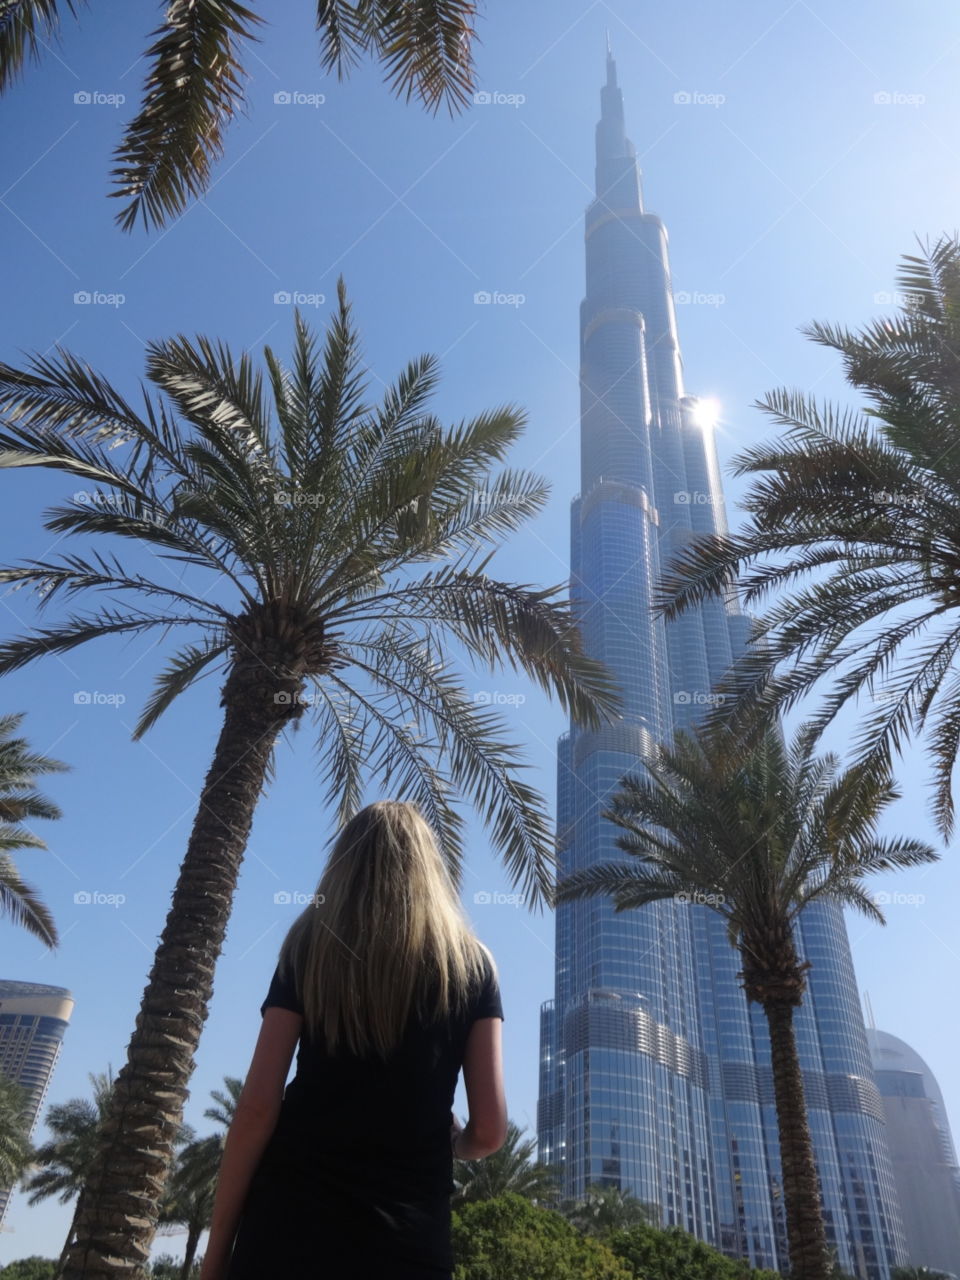 Business trip to Dubai, looking up at the Burj Khalifa, world's tallest building. 